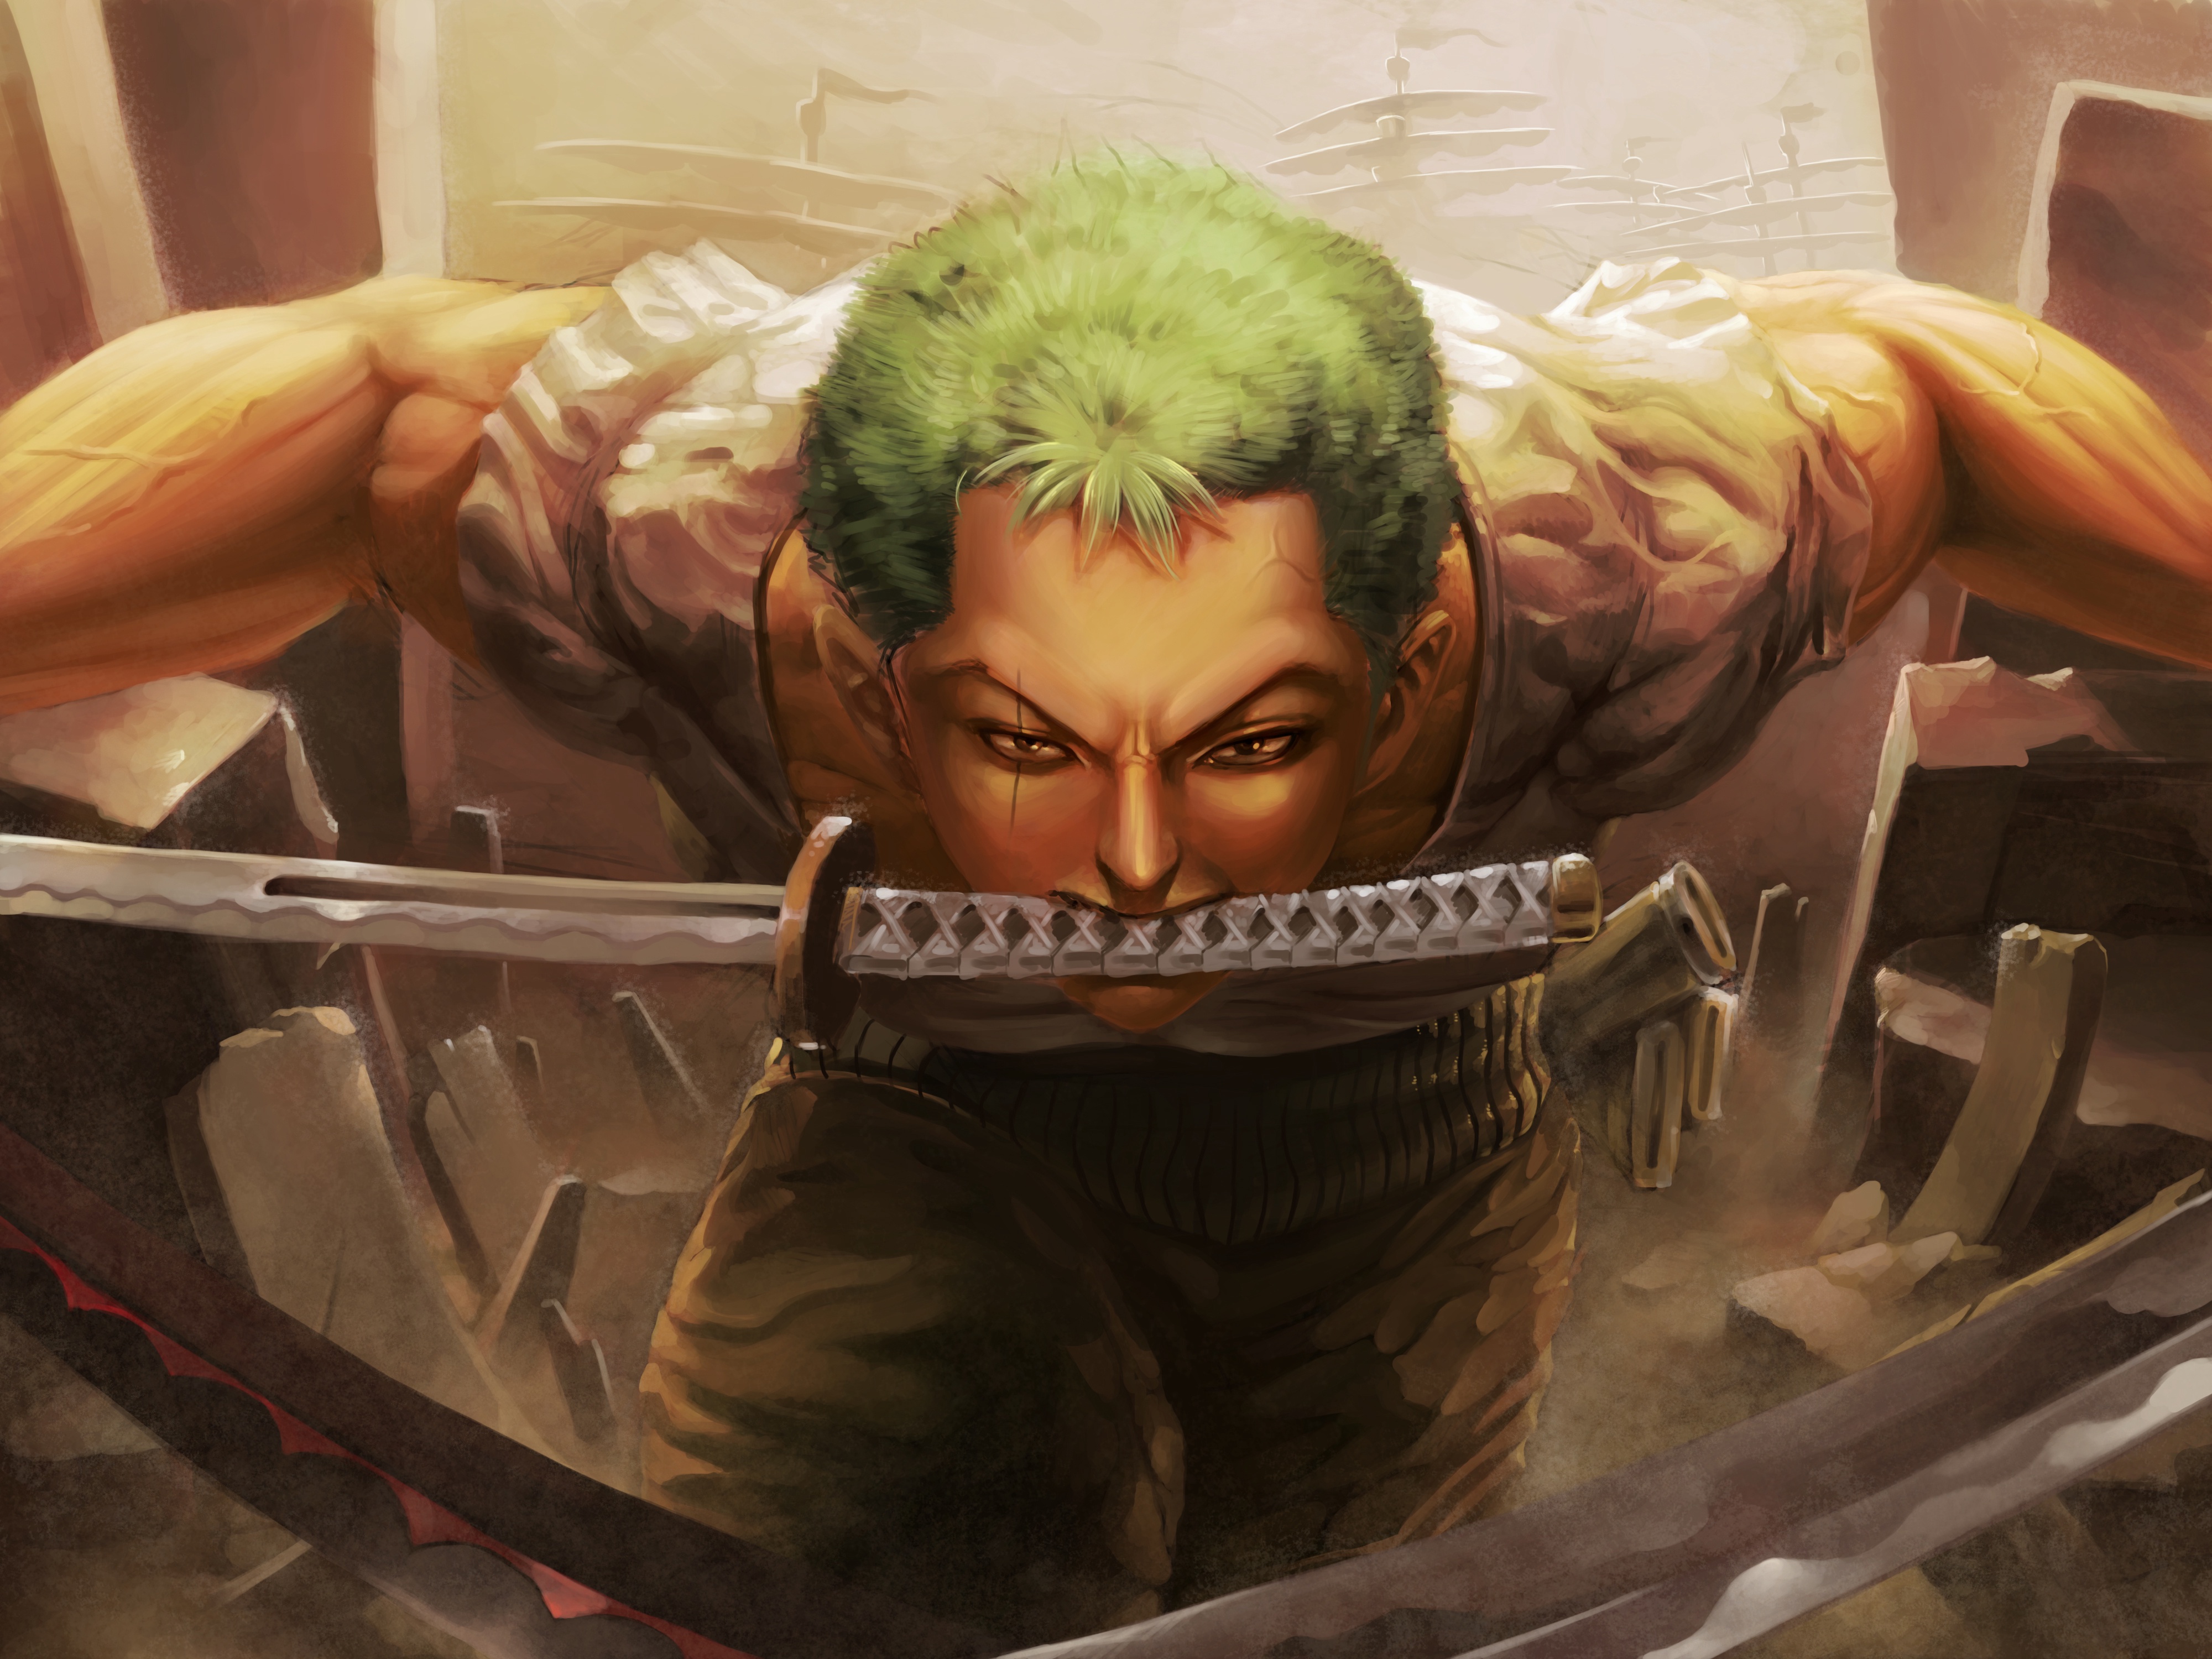 560+ Roronoa Zoro HD Wallpapers and Backgrounds